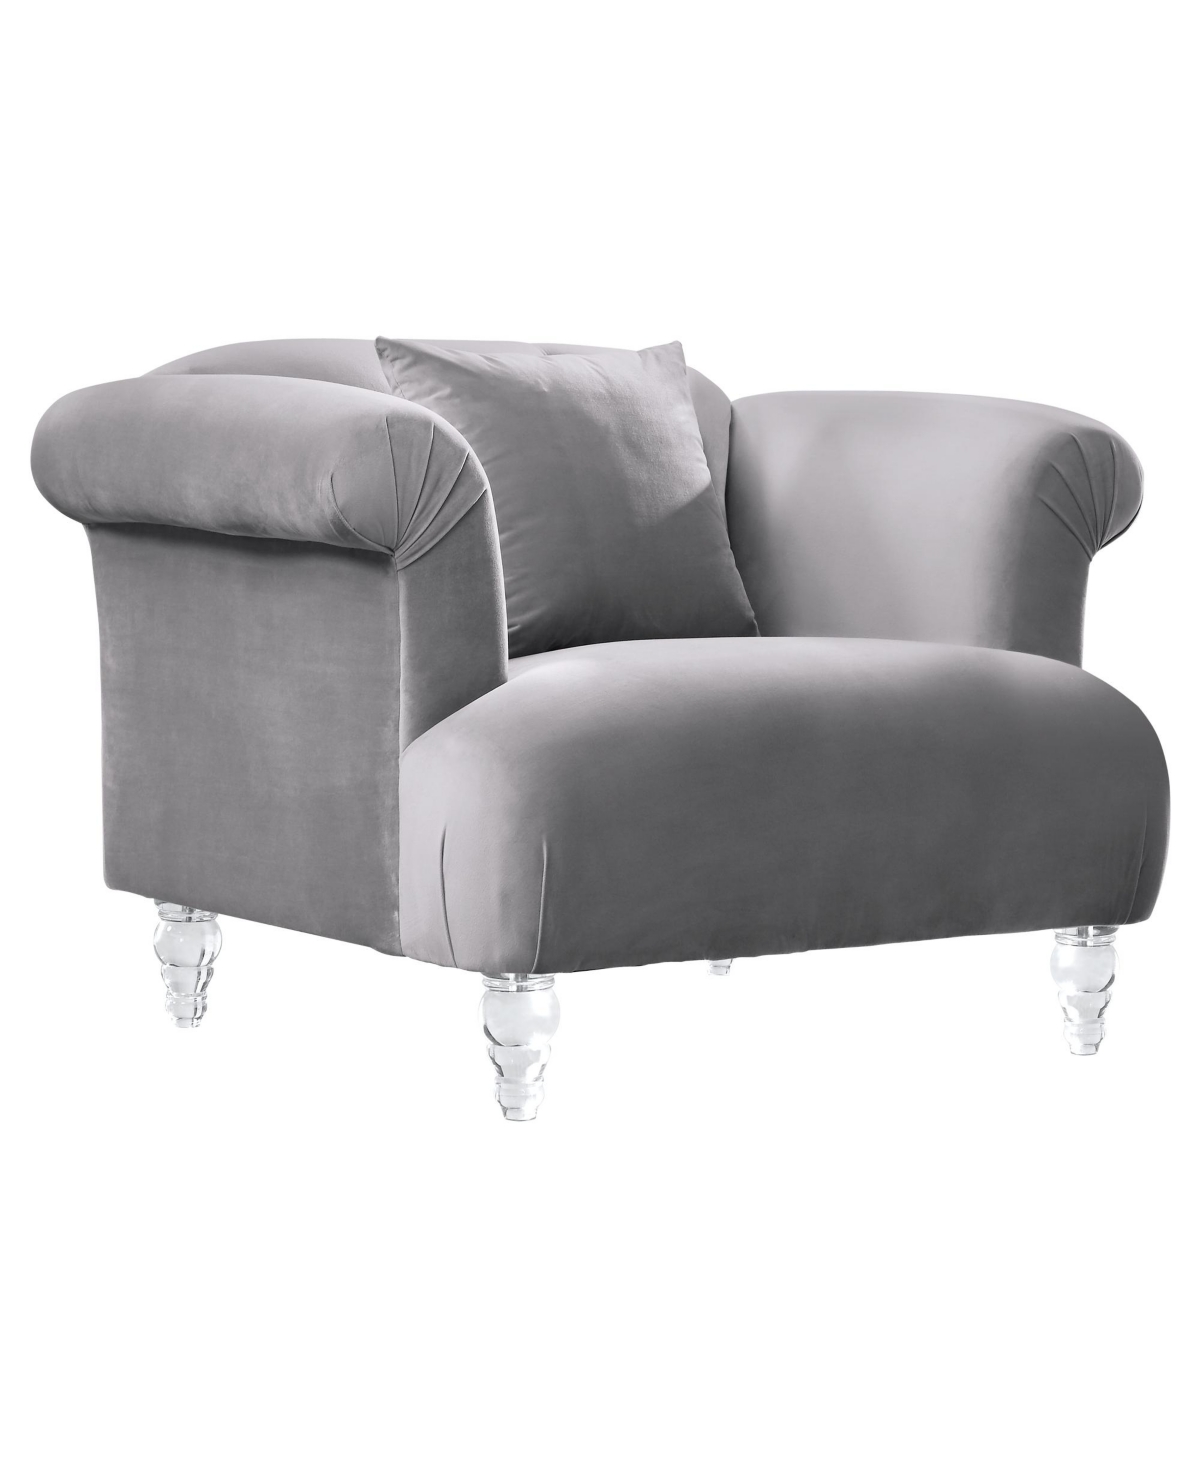 Armen Living Elegance 41" Velvet With Acrylic Legs In Contemporary Sofa Chair In Gray